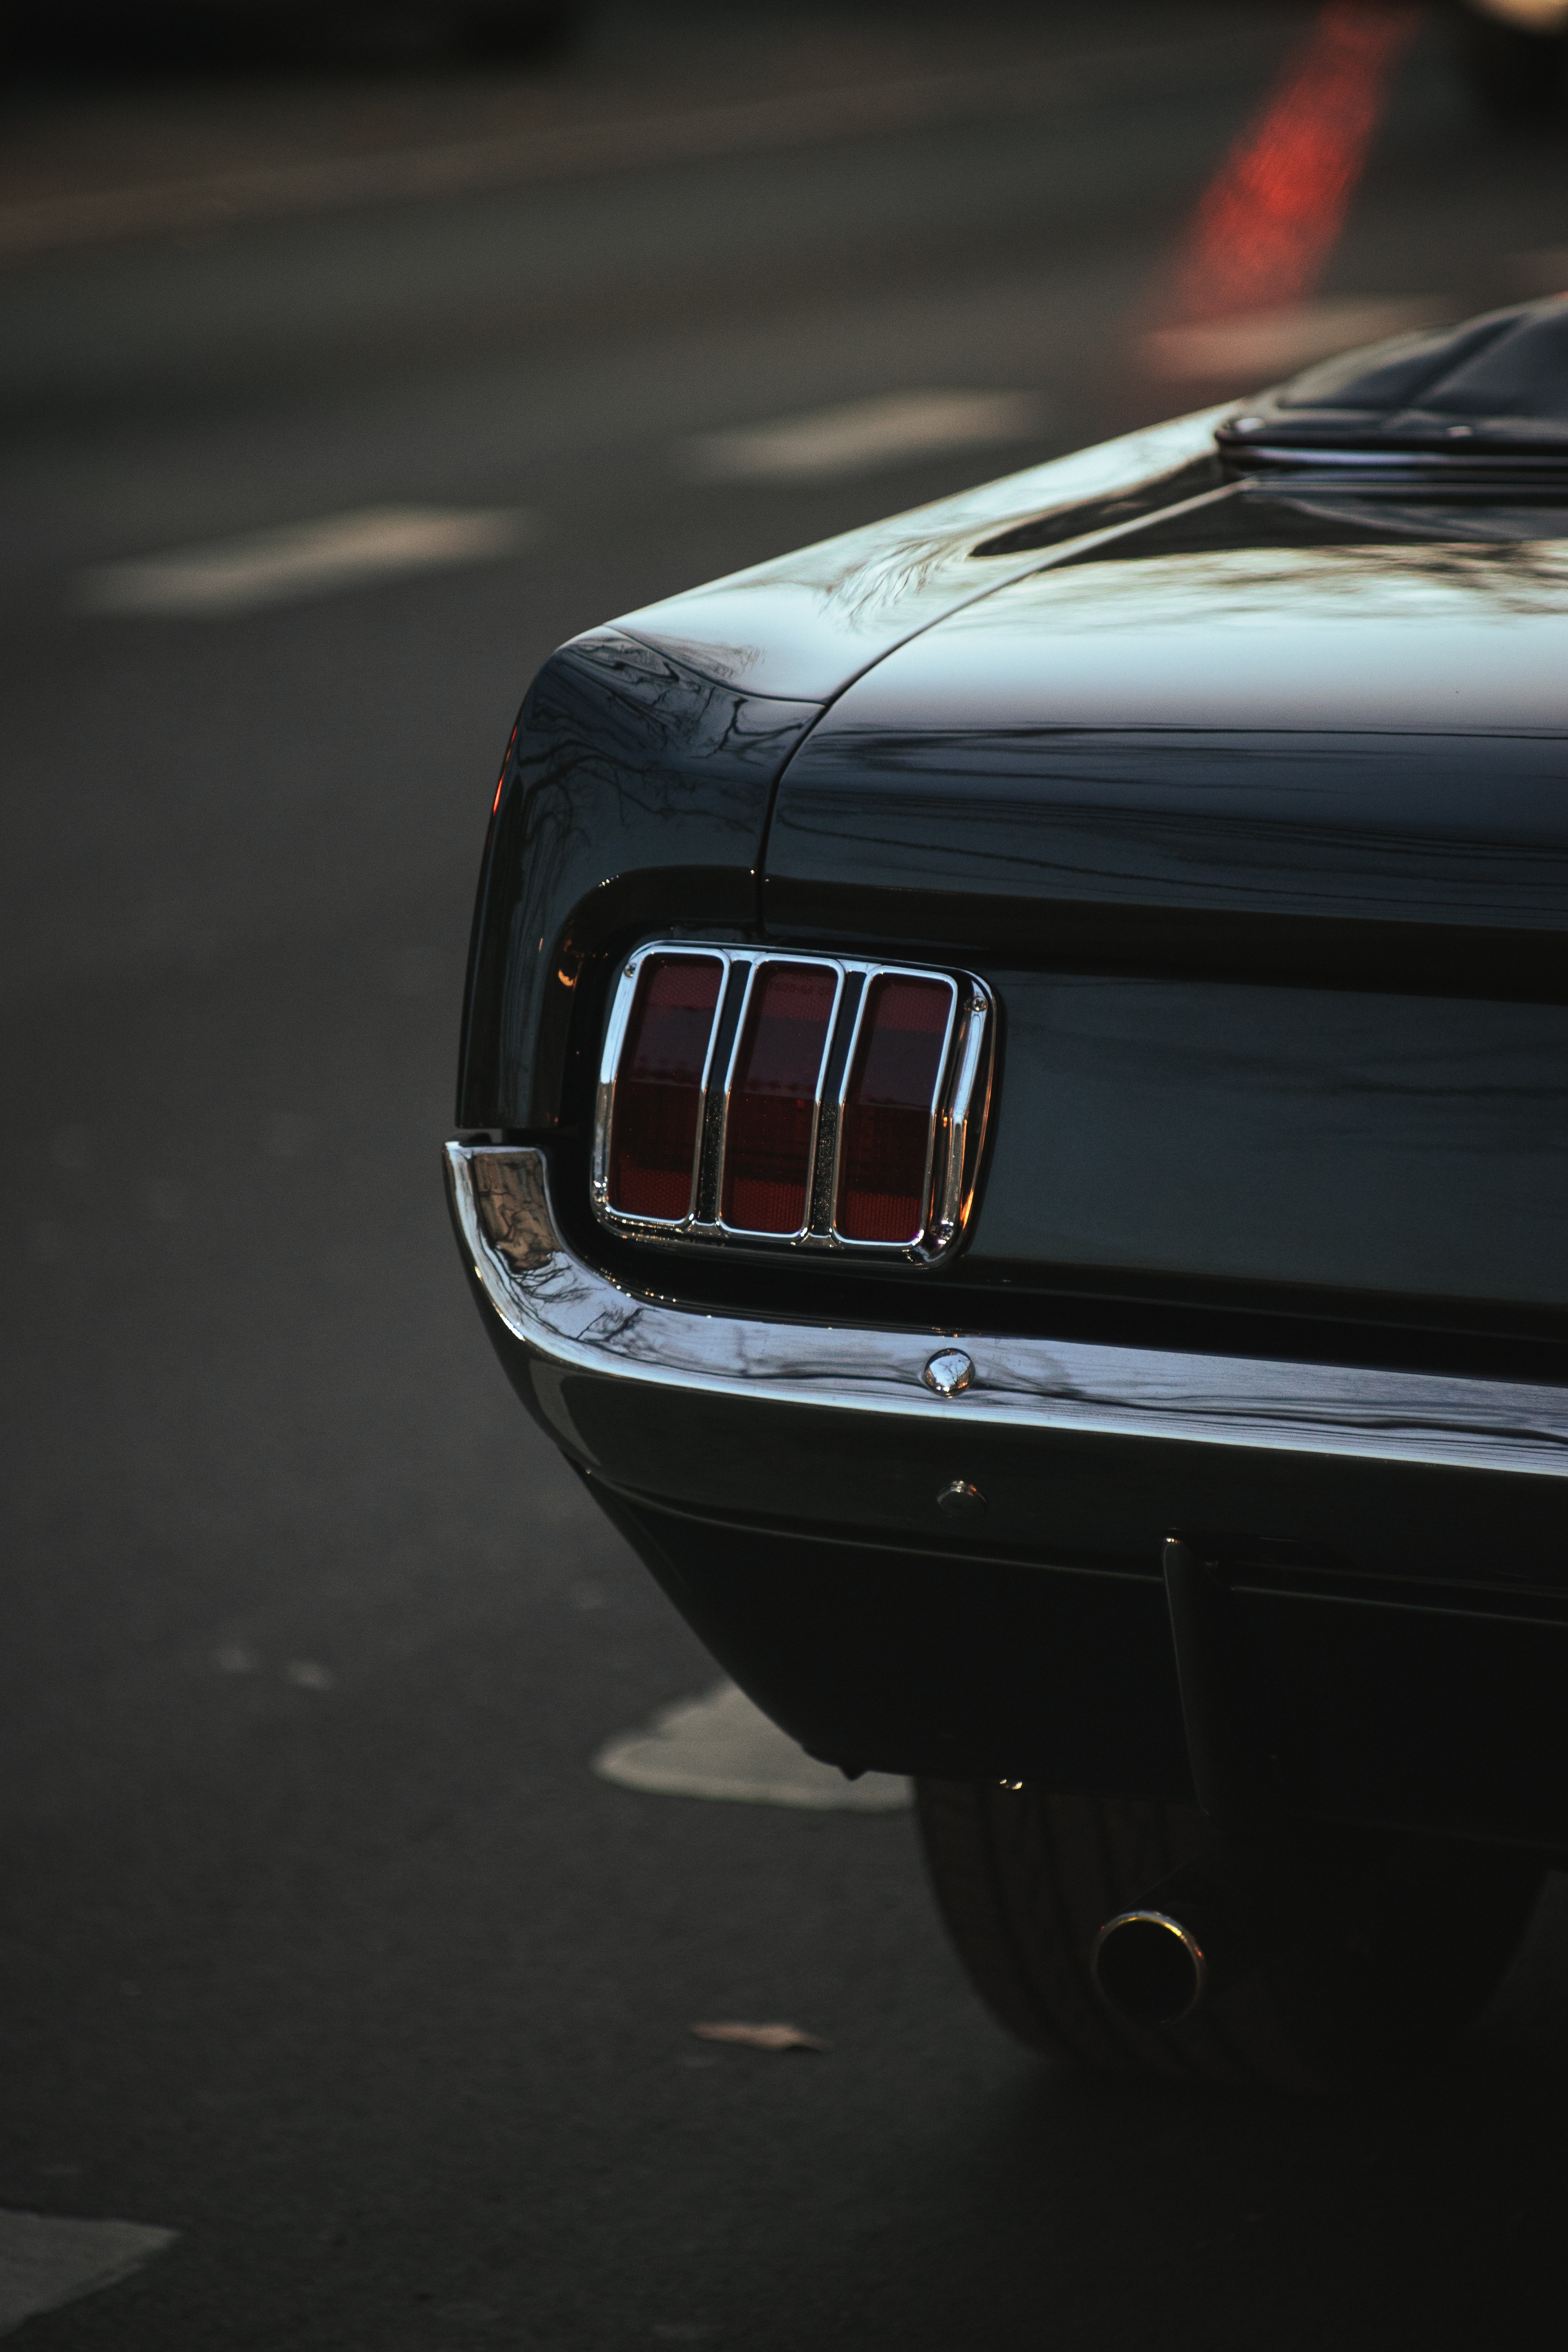 ford mustang, mustang, cars, black, car, lamp, lantern, back view, rear view for android